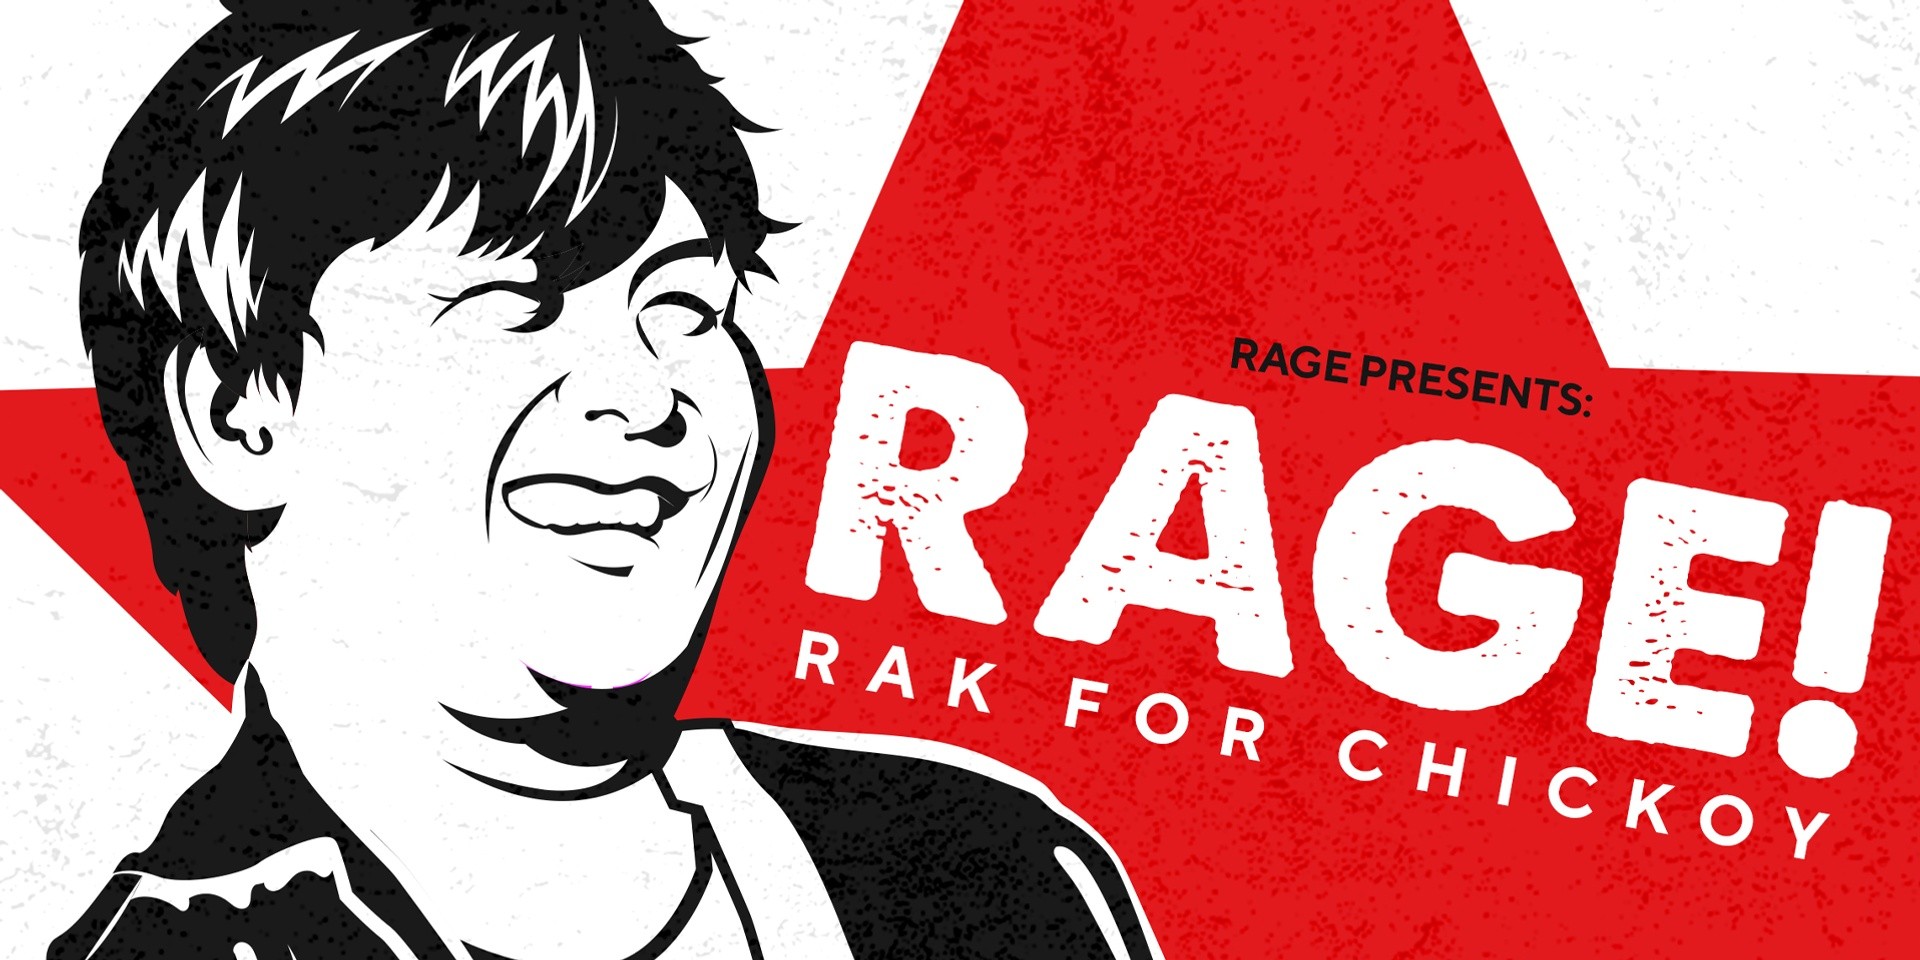 Ultracombo, Ebe Dancel, Bullet Dumas, and more to perform at benefit gig RAGE! Presents: Rak for Chickoy